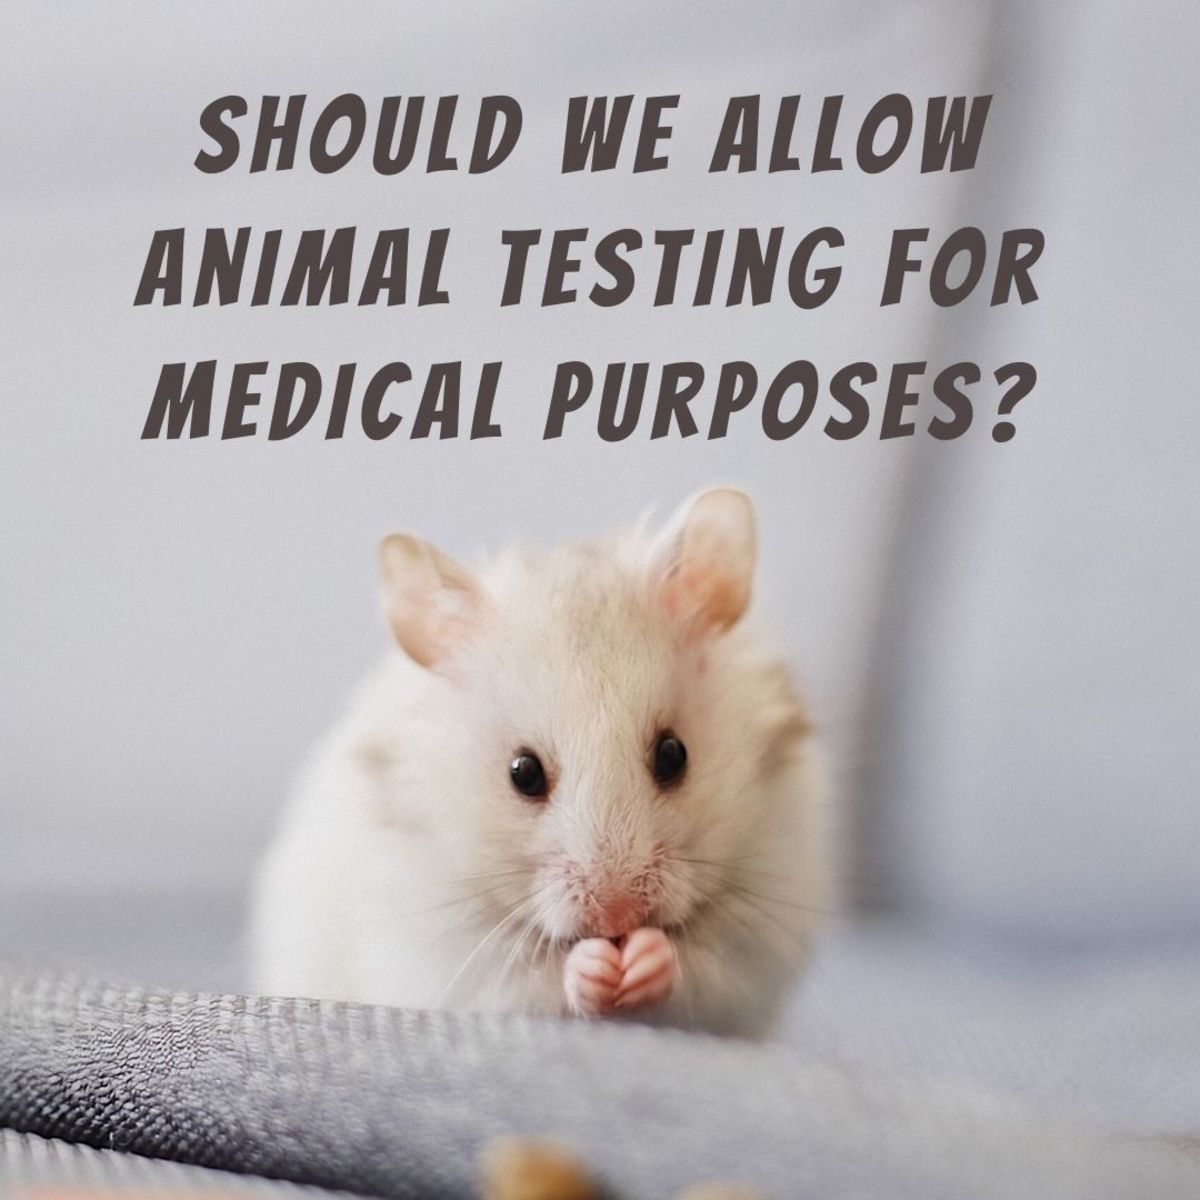 Ethical Dilemma: Should Animal Testing for Medical Purposes Be Allowed?